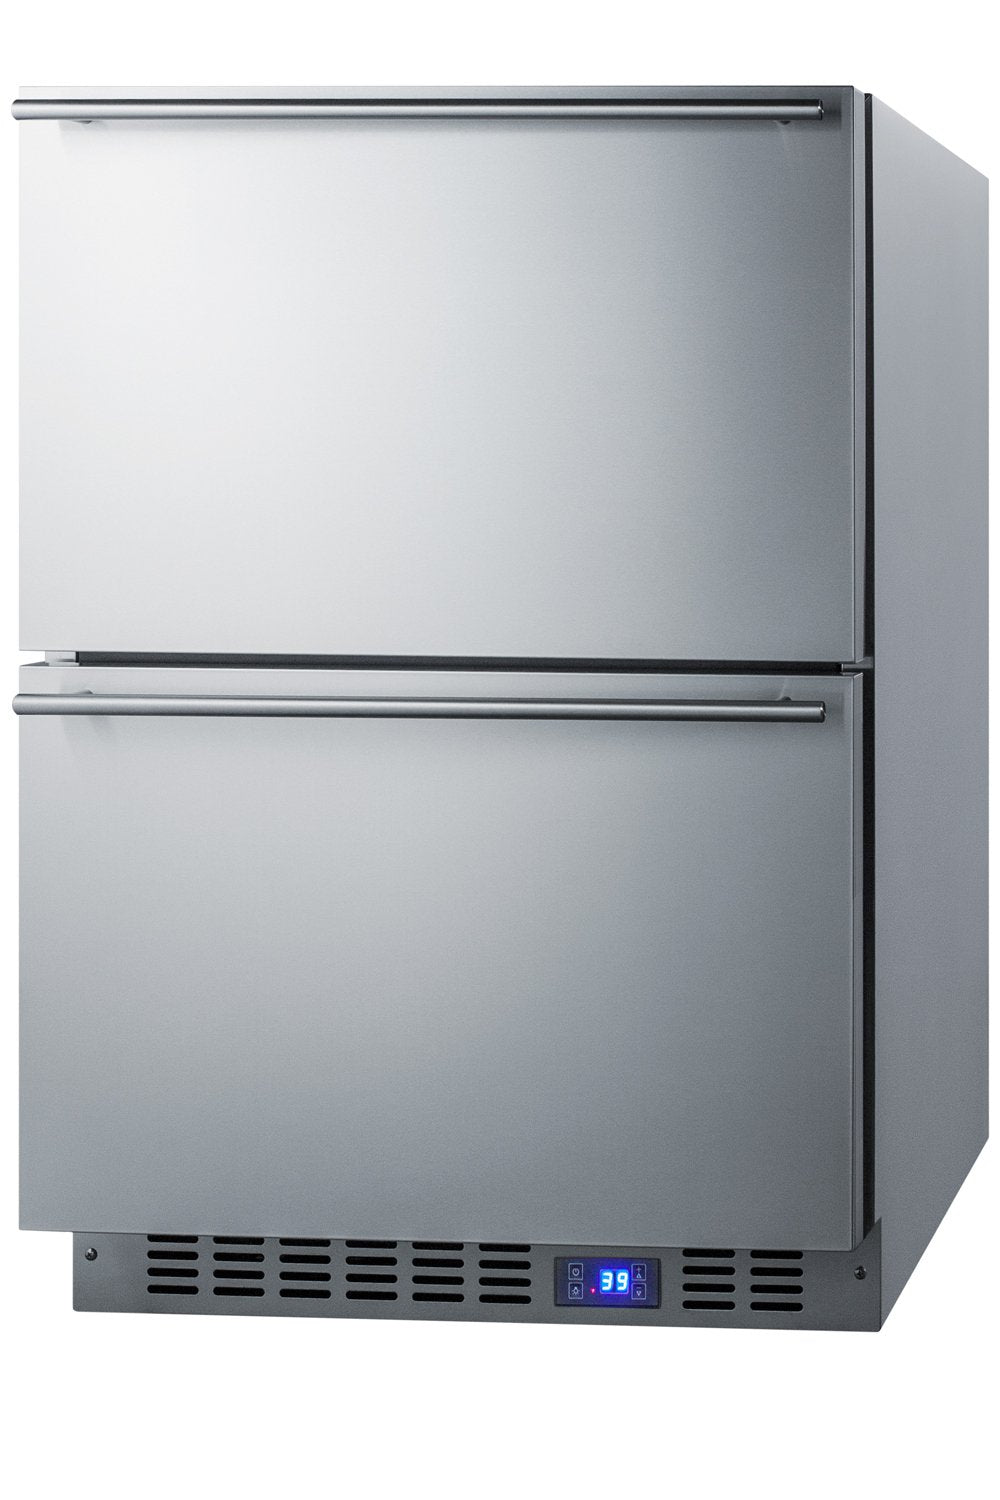 SUMMIT 24 in. Built-In 2-Drawer All-Refrigerator (FF642D)